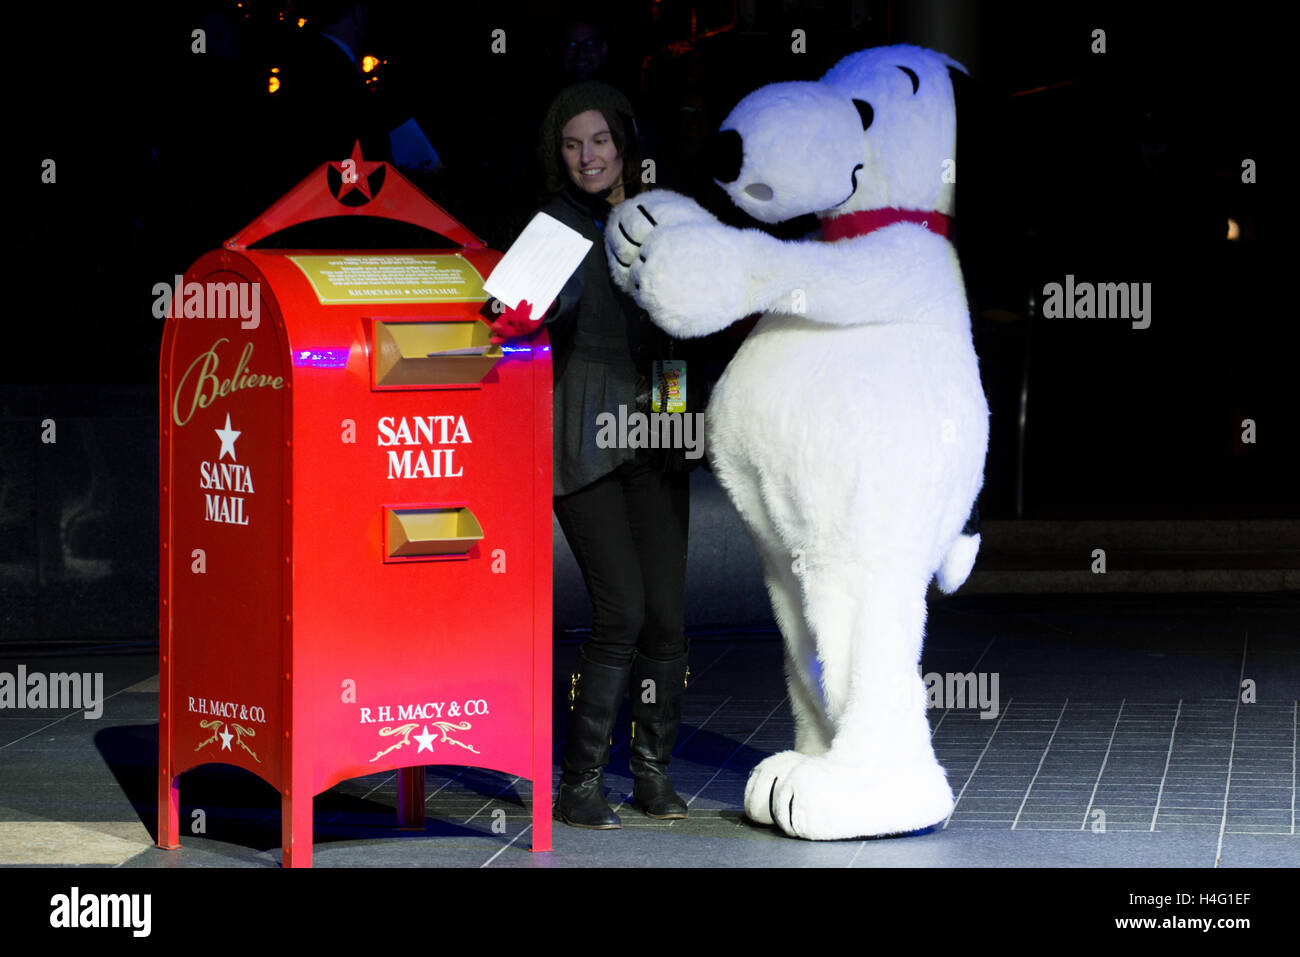 Snoopy sends a letter during the Macy's Christmas tree lighting ceremony at Union Square in downtown San Francisco California on November 27th 2015. Stock Photo